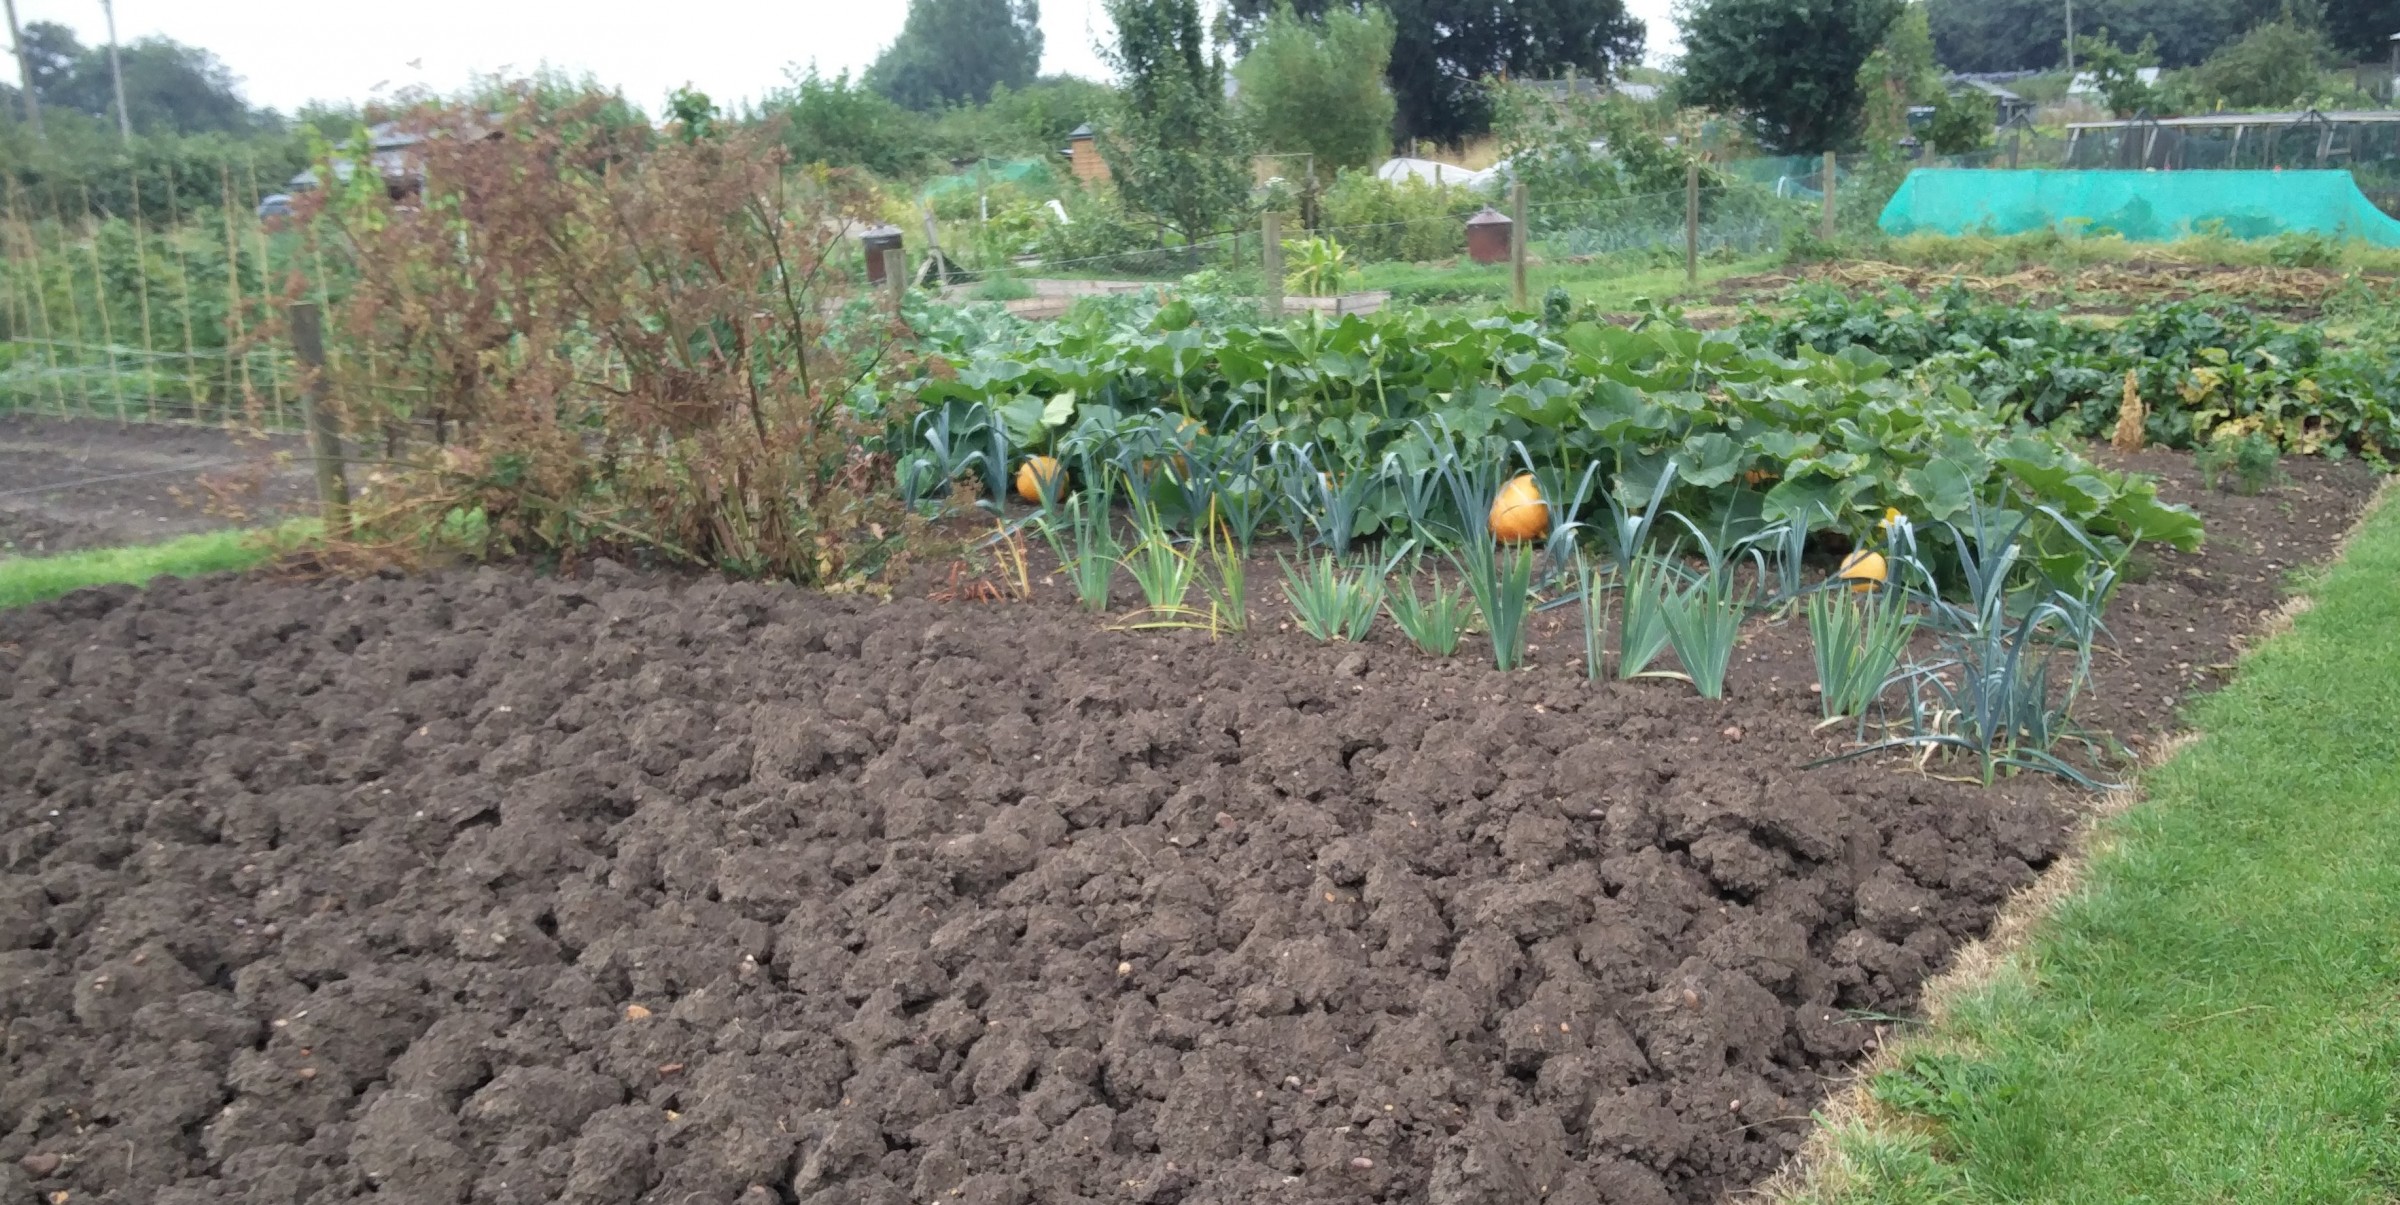 Want an allotment in the traditional style?  This guide takes you through the key steps to setup up a traditional allotment.